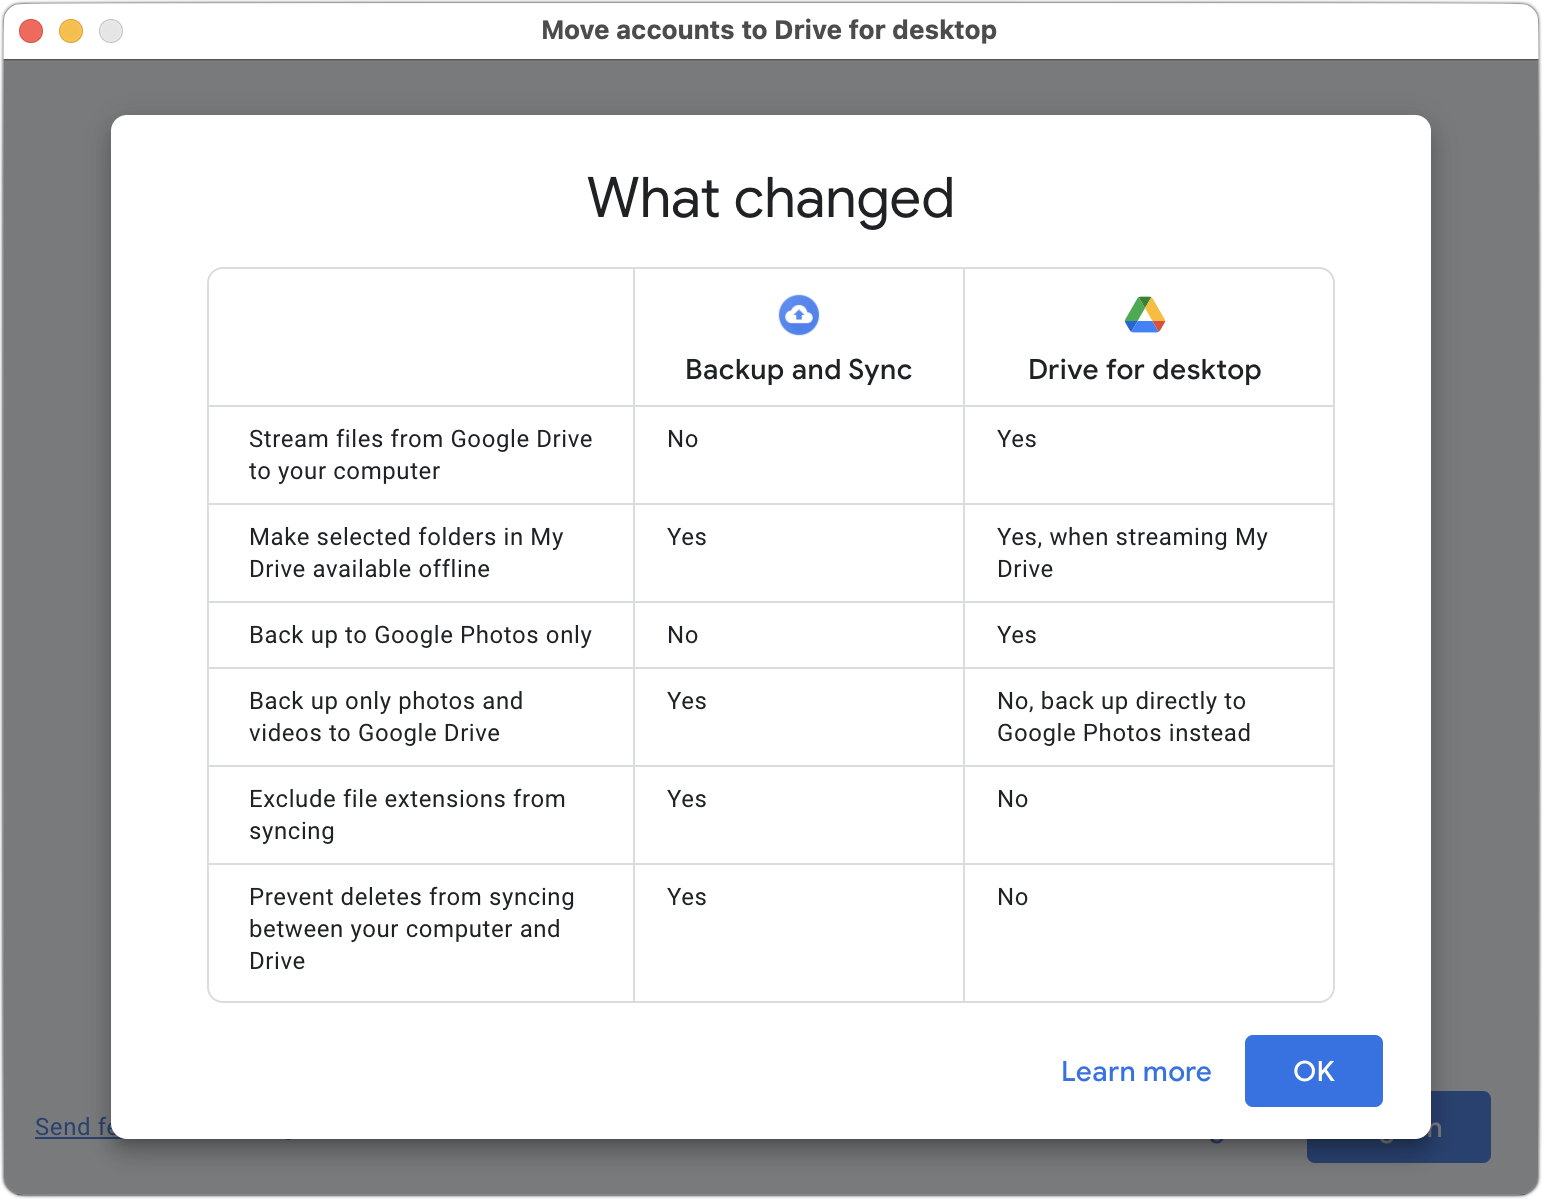 Differences between Google Drive for desktop and Backup and Sync